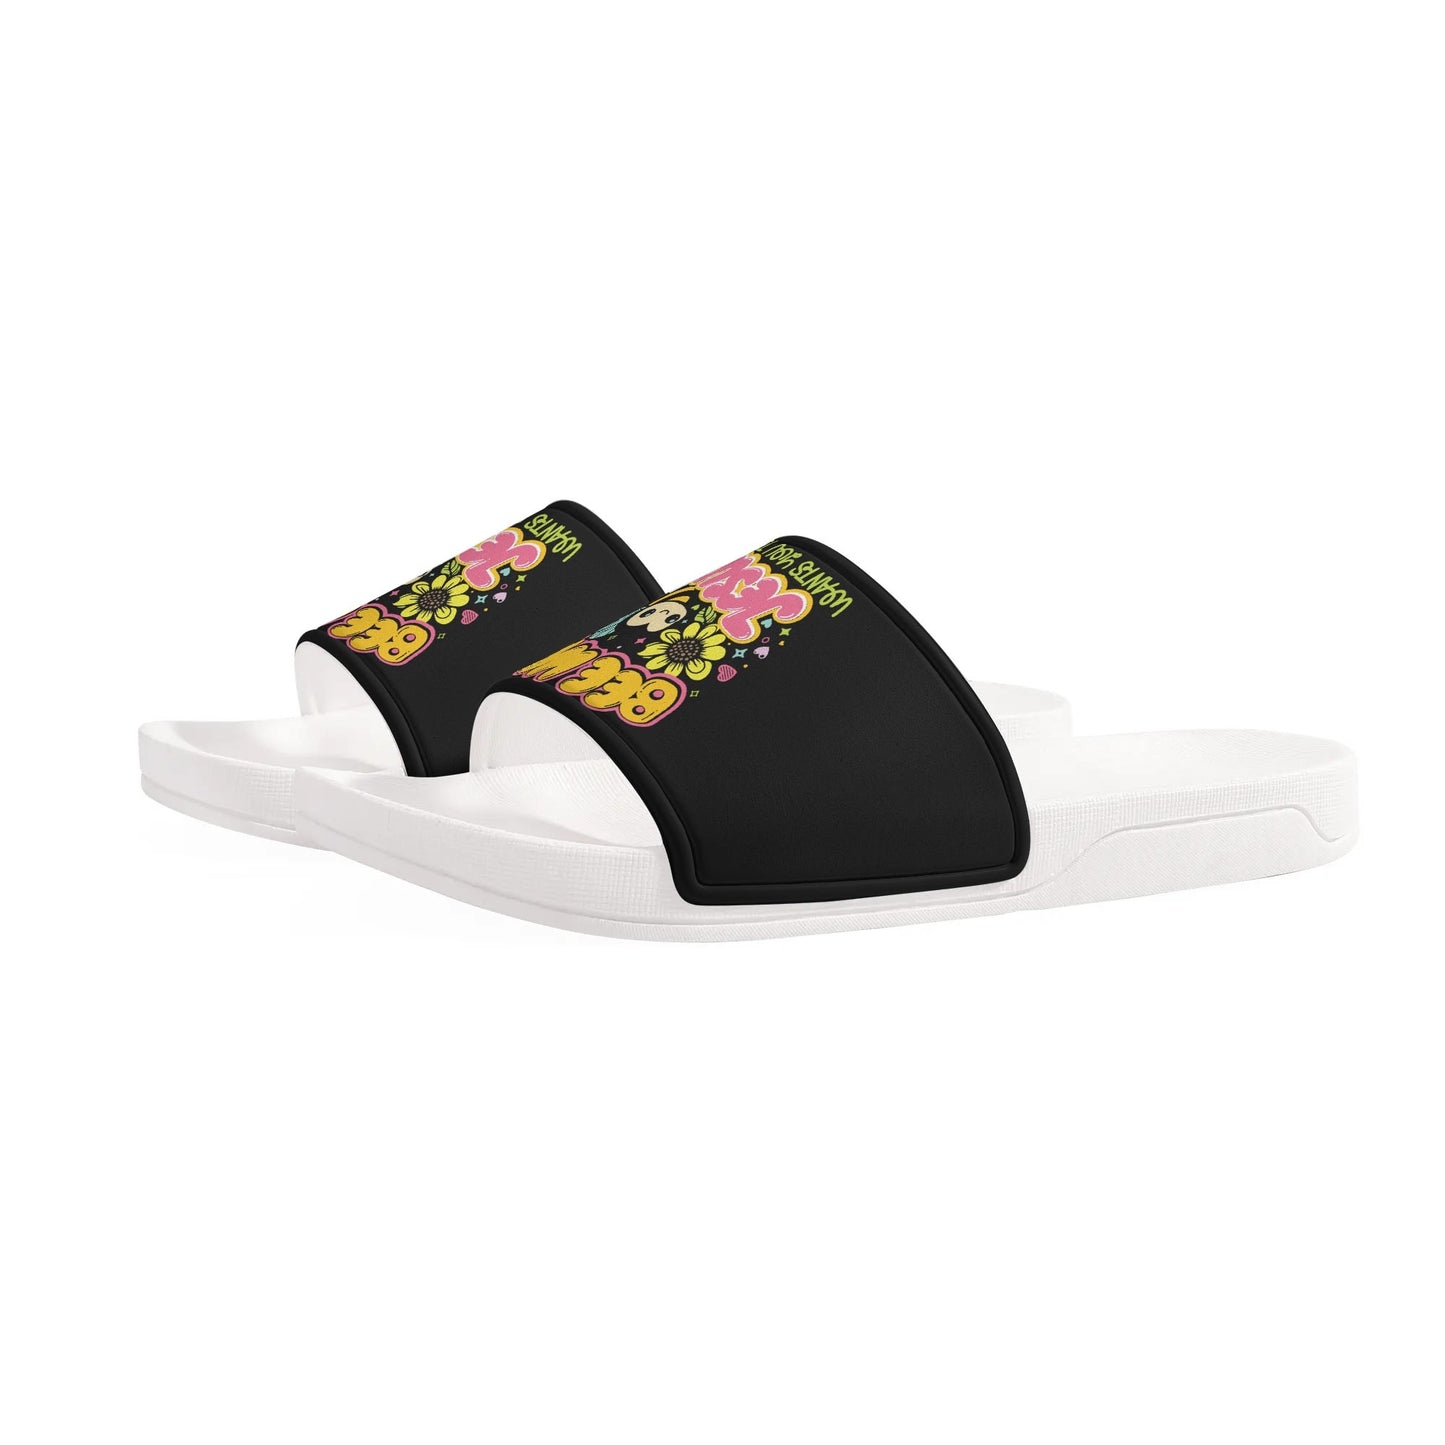 Bee Who Jesus Wants You To Be Kids Christian Slide Sandals